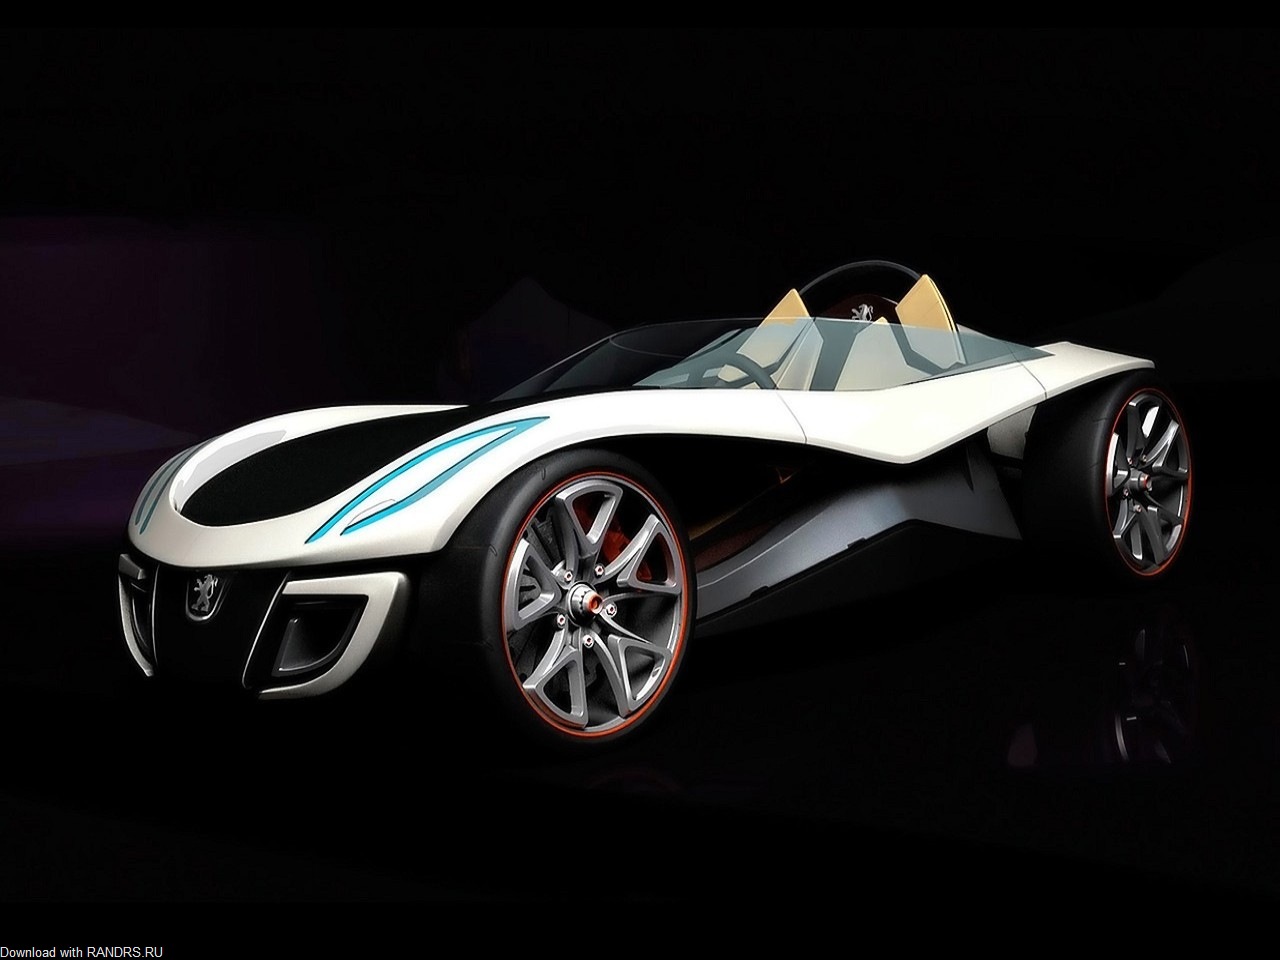 Pictures 3D Car New Wallpapers wallpapers pictures download 1280x960